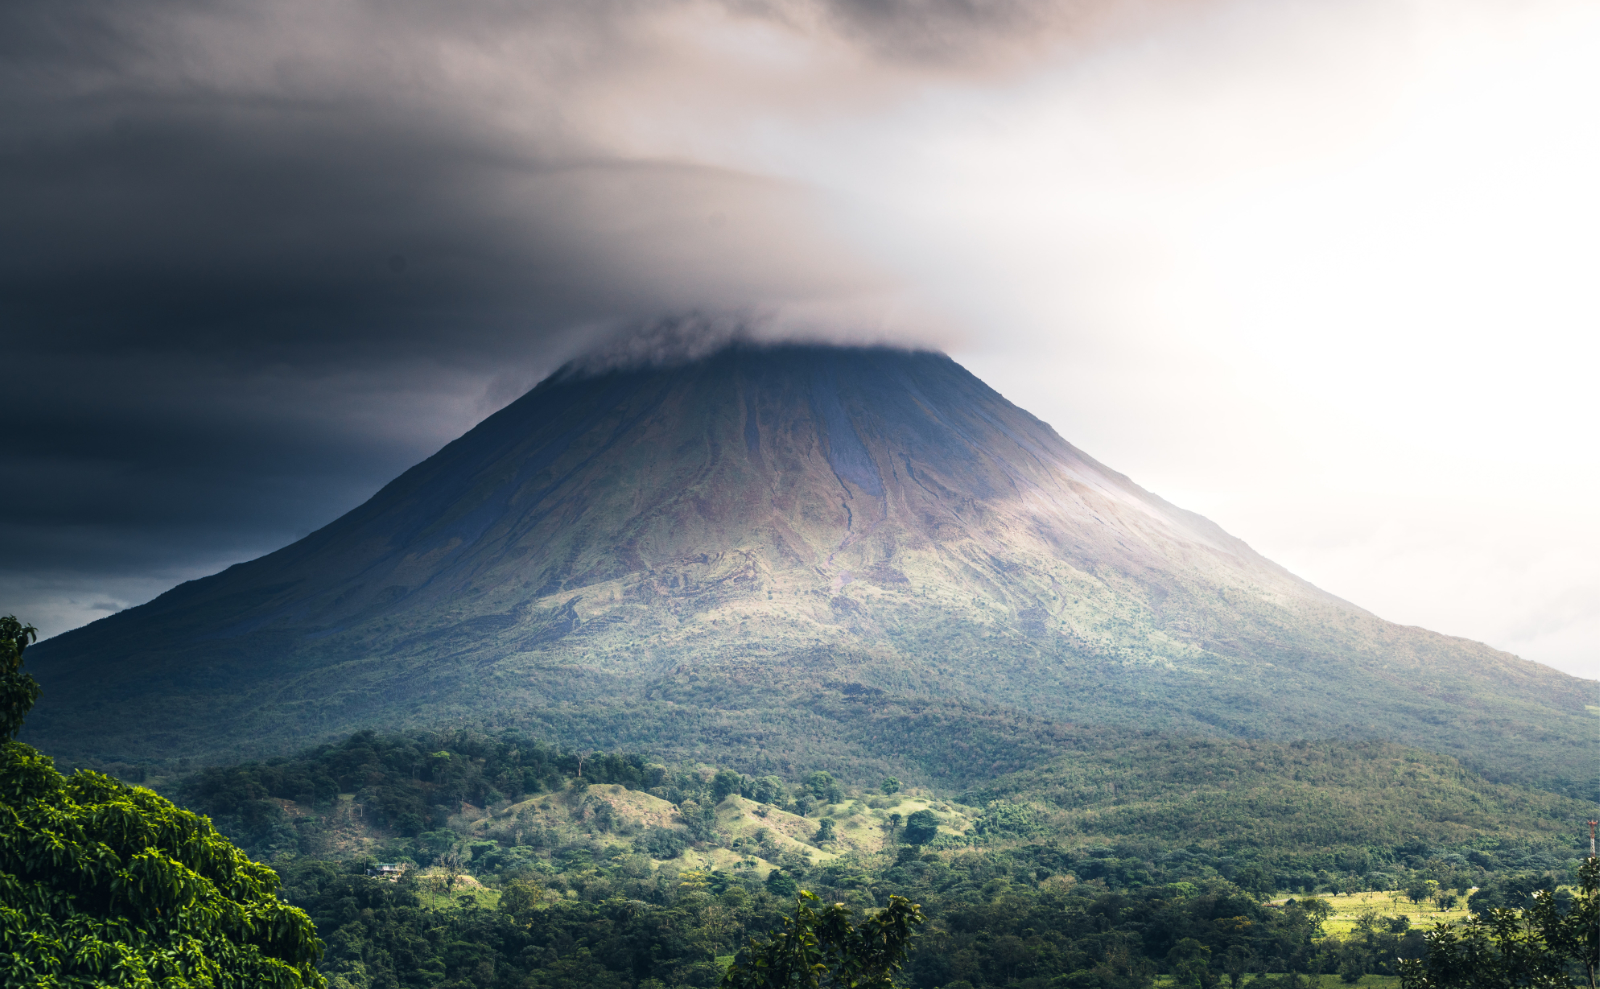 Transcript / SSoP Podcast Episode 26 — Costa Rica: Cloud Forests, Coffee, and Capuchin Monkeys